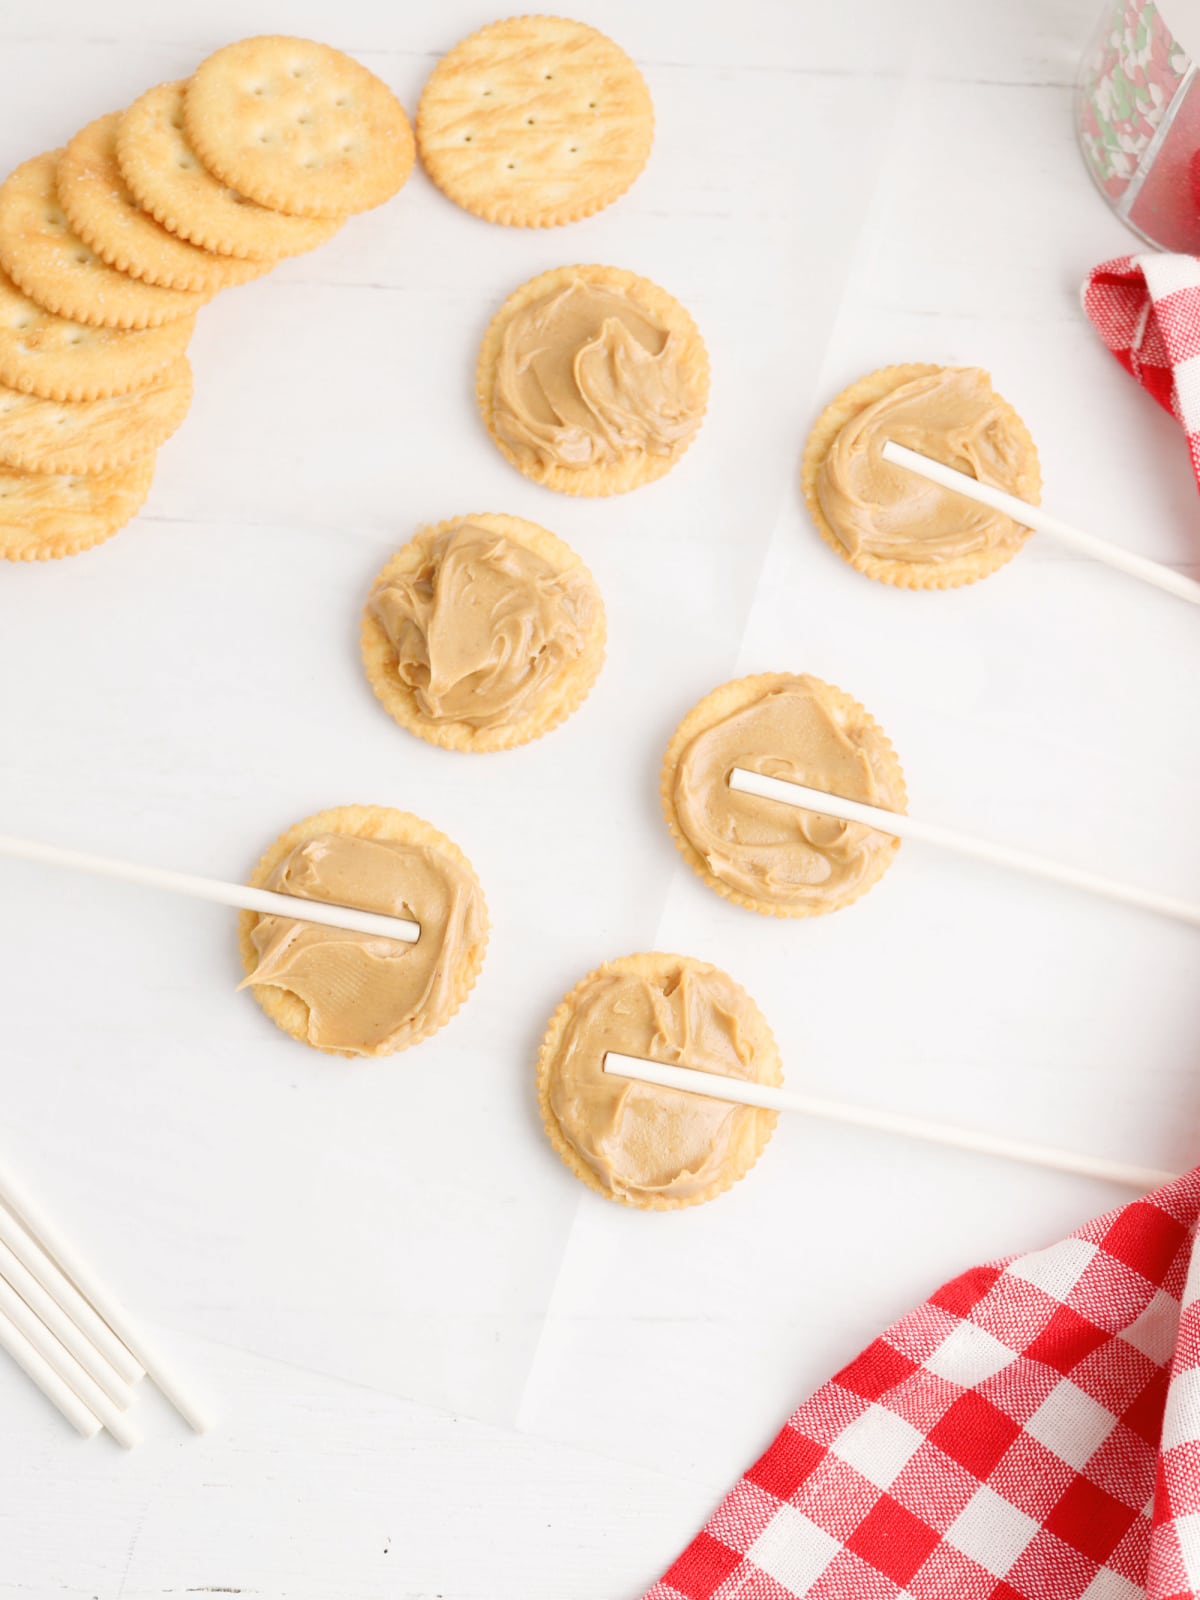 peanut butter on crackers with lollipop stick